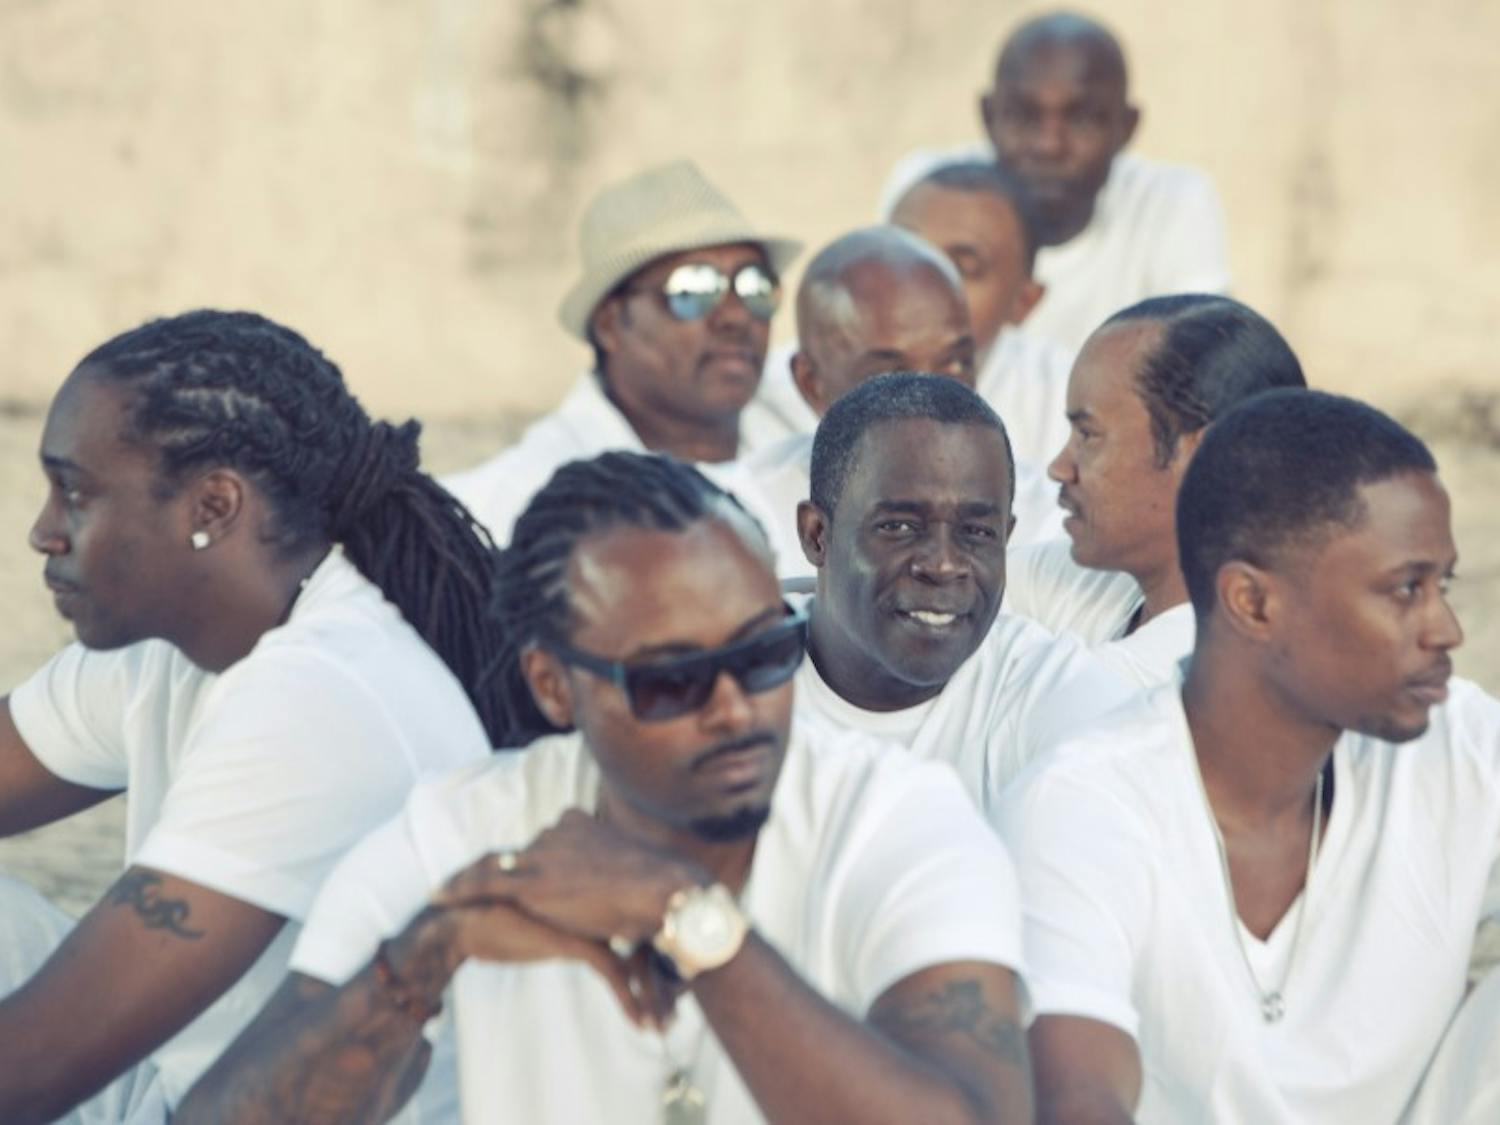 Dyson Knight, the furthest to the right, and the rest of the Baha Men